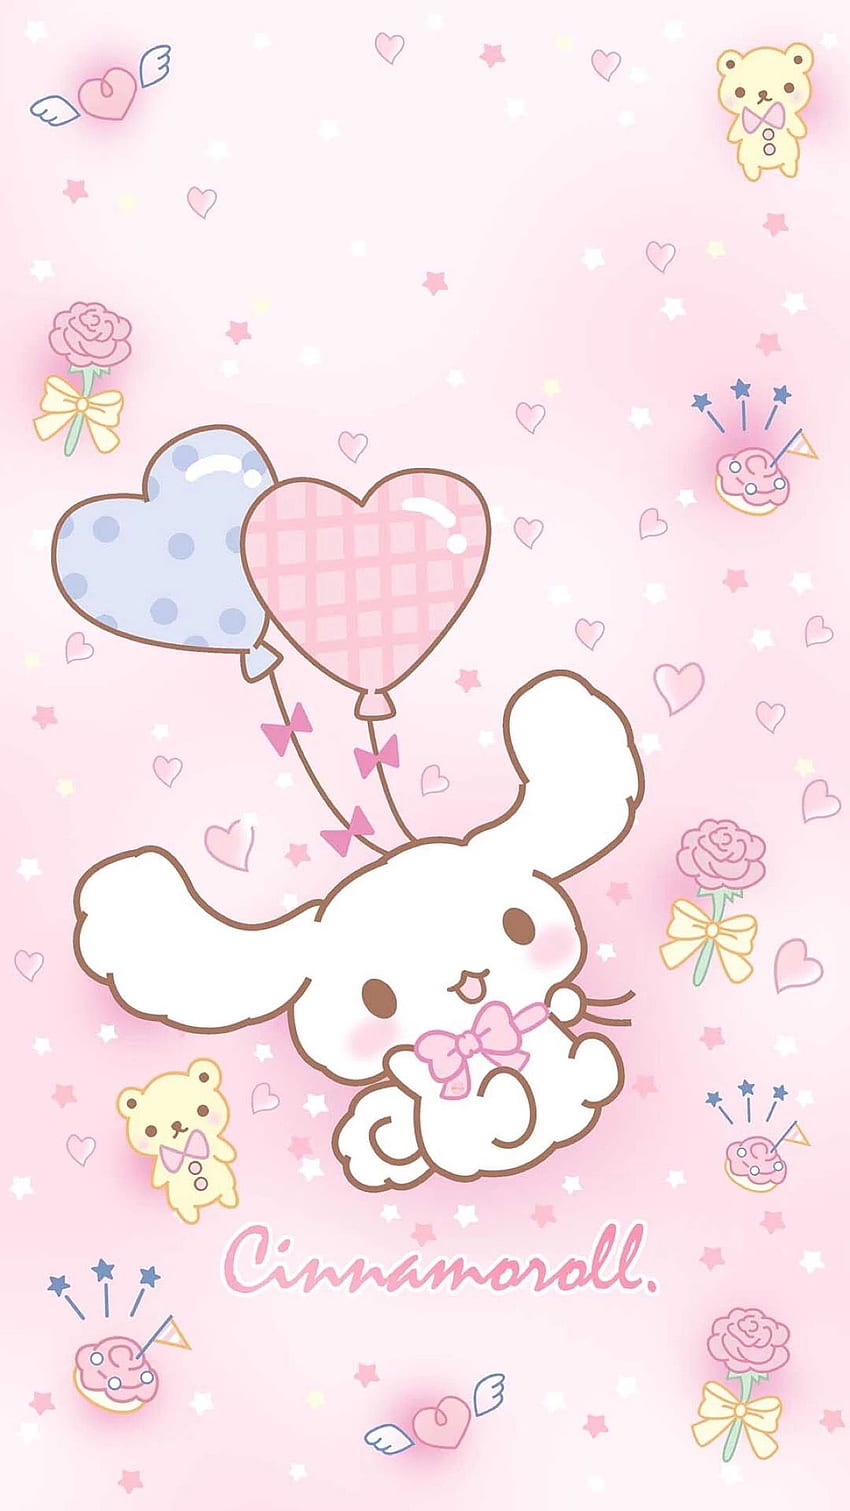 Download Wallpaper Hello Kitty Background High Quality Image